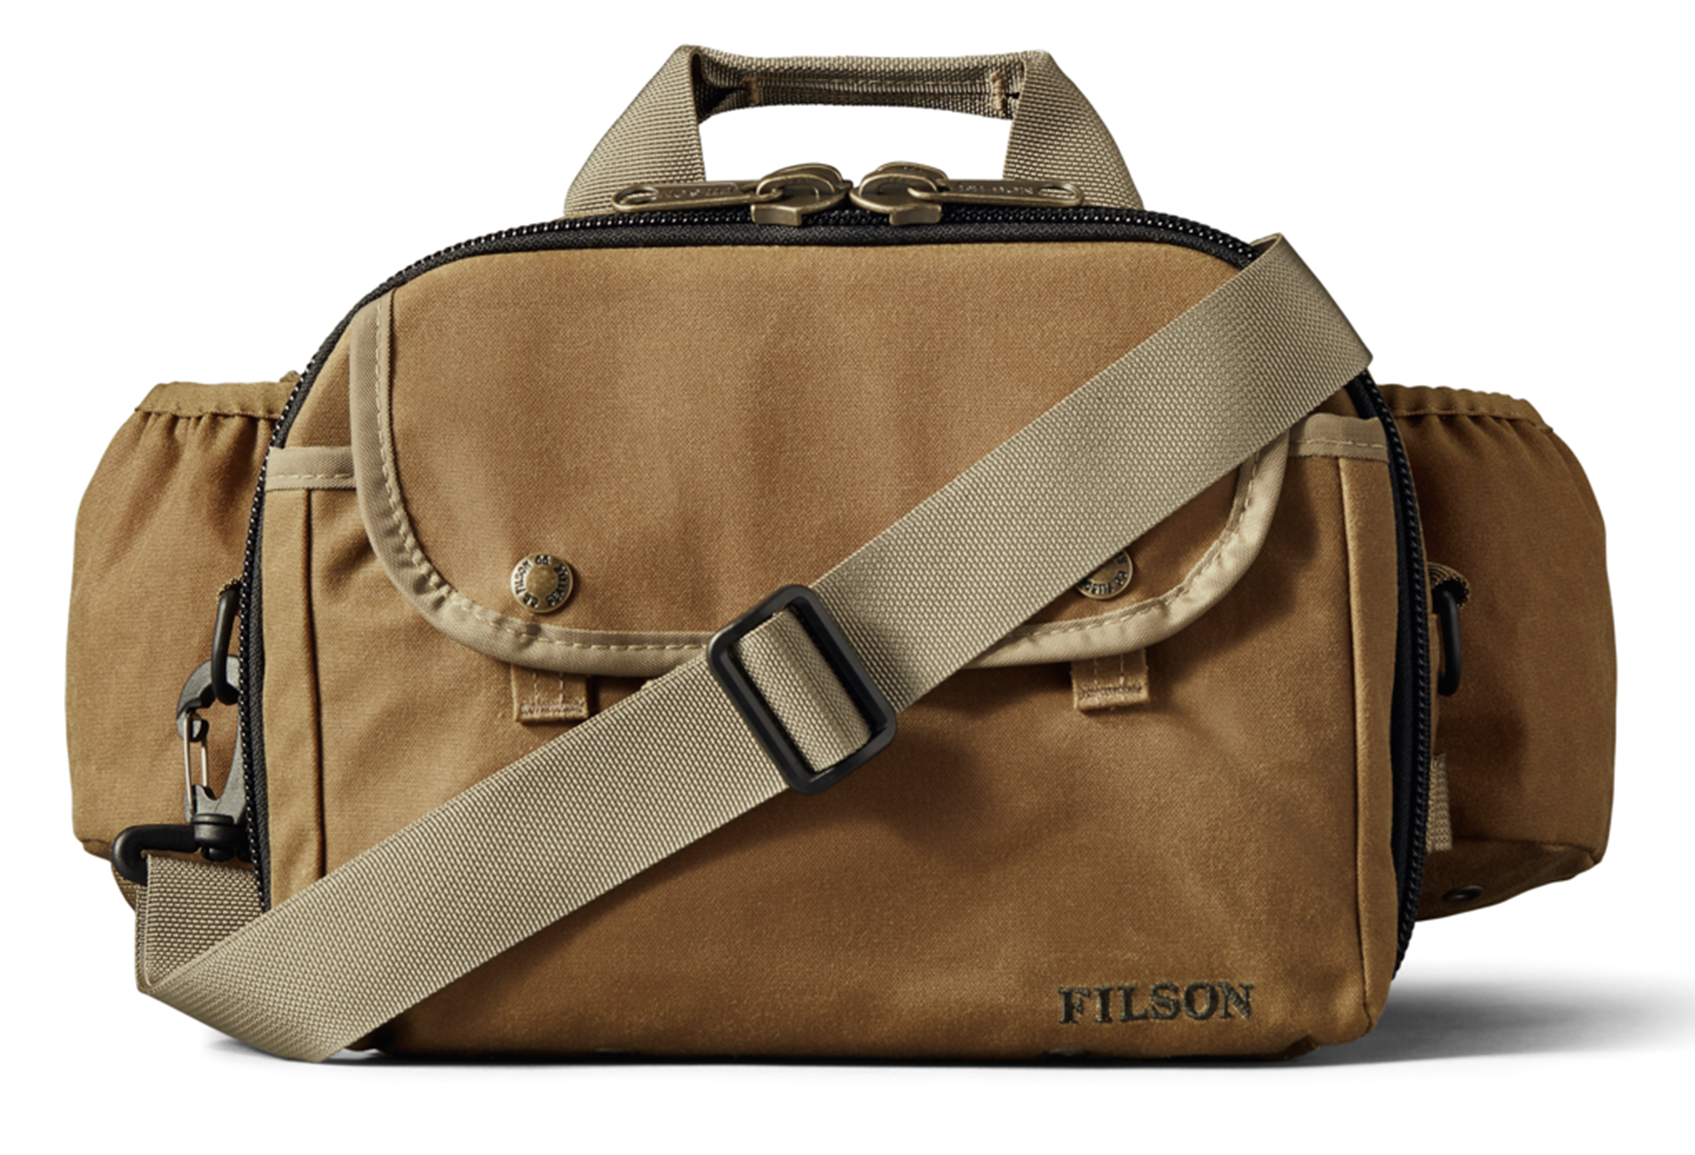 Filson Unveils New Fly Fishing Products - Moldy Chum